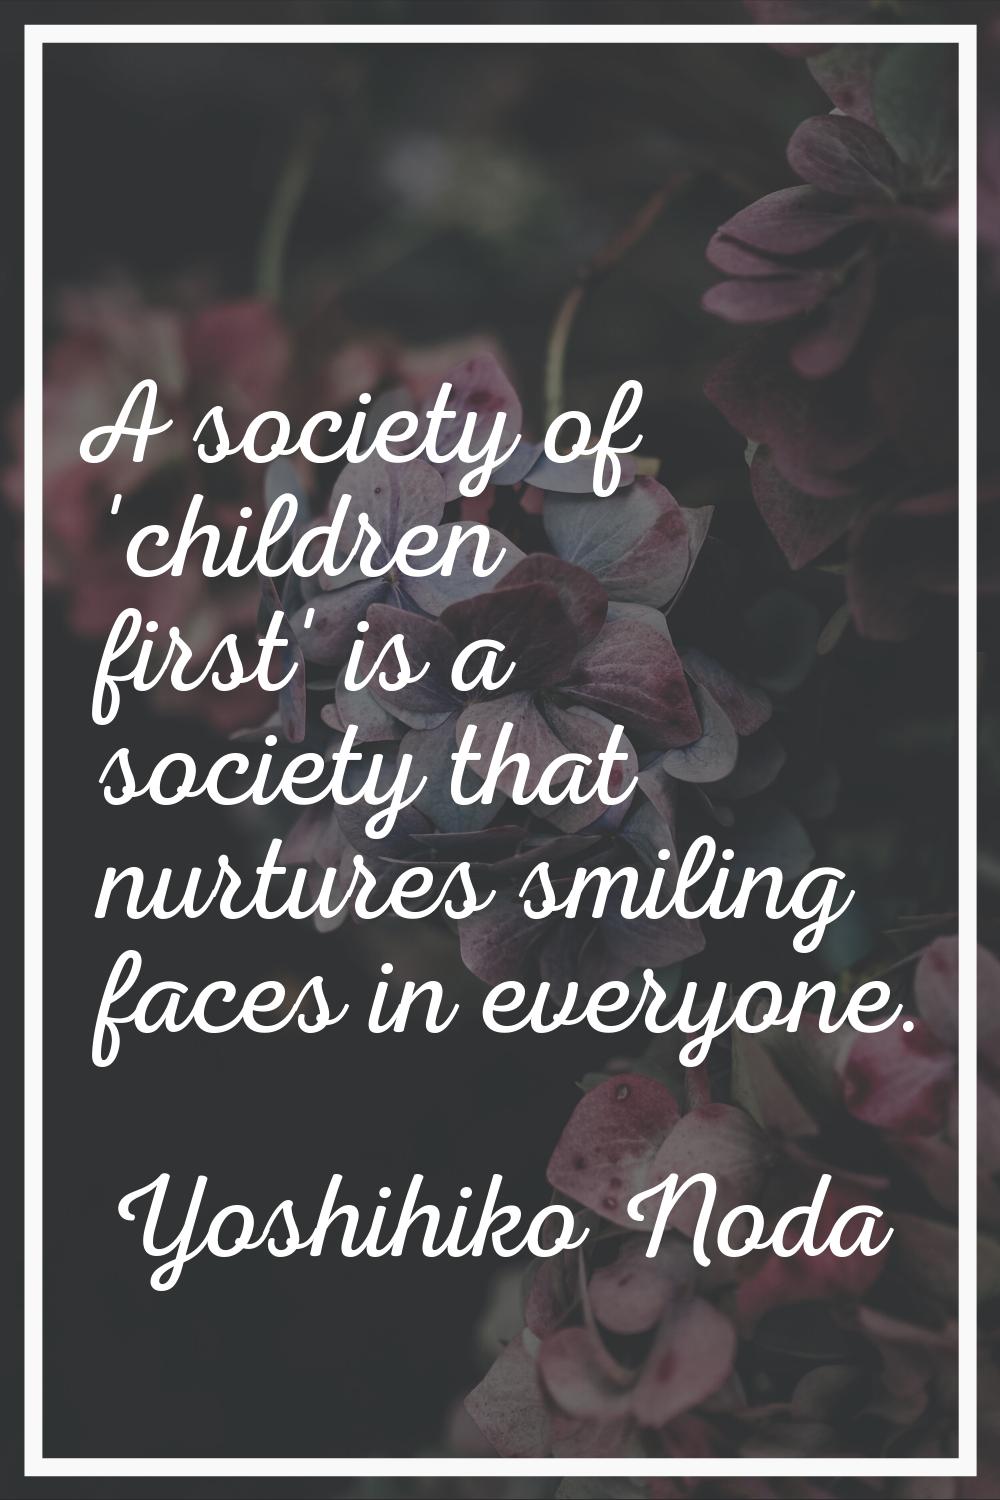 A society of 'children first' is a society that nurtures smiling faces in everyone.